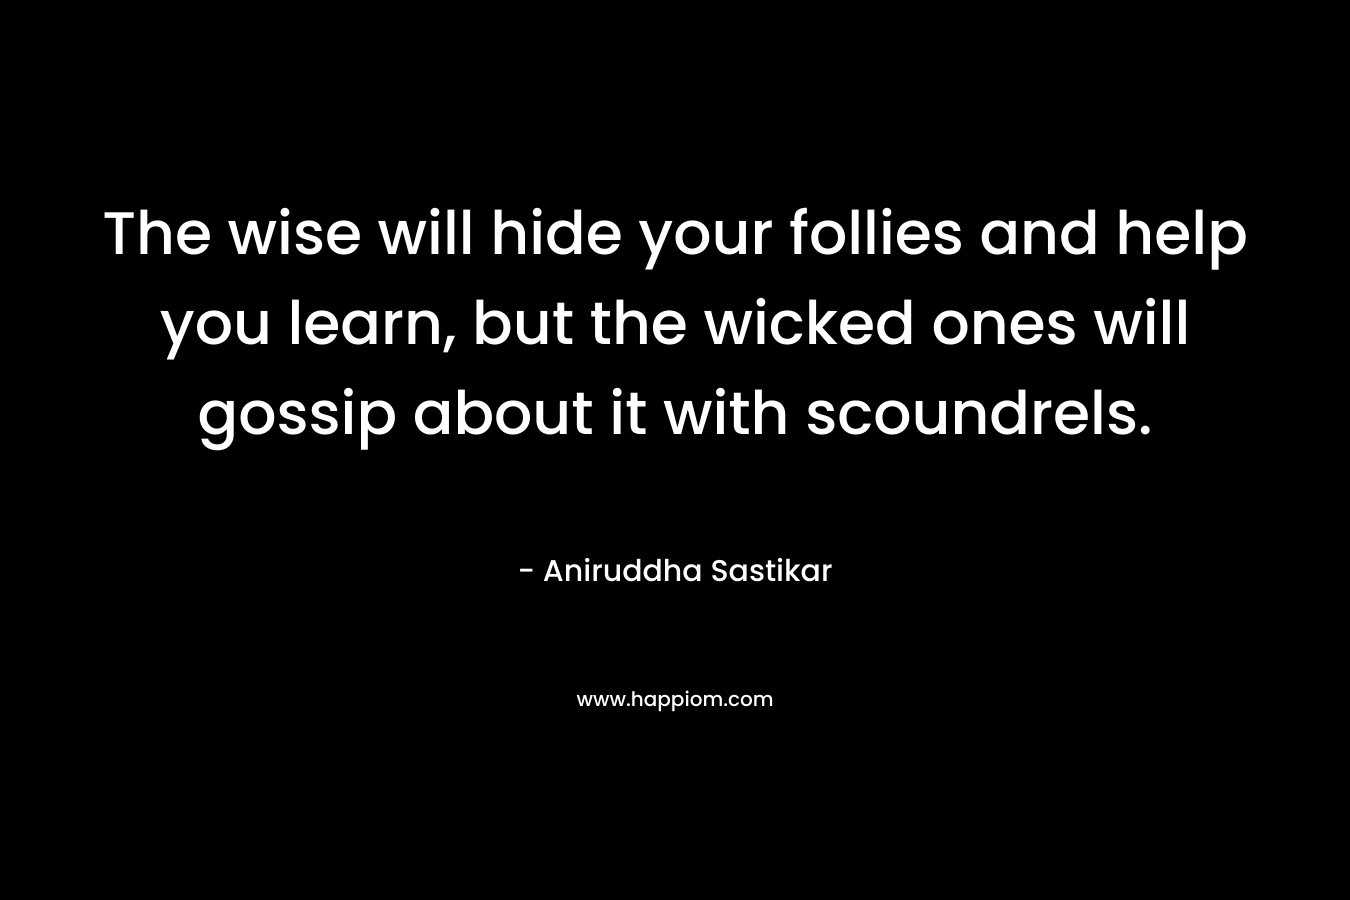 The wise will hide your follies and help you learn, but the wicked ones will gossip about it with scoundrels. – Aniruddha Sastikar